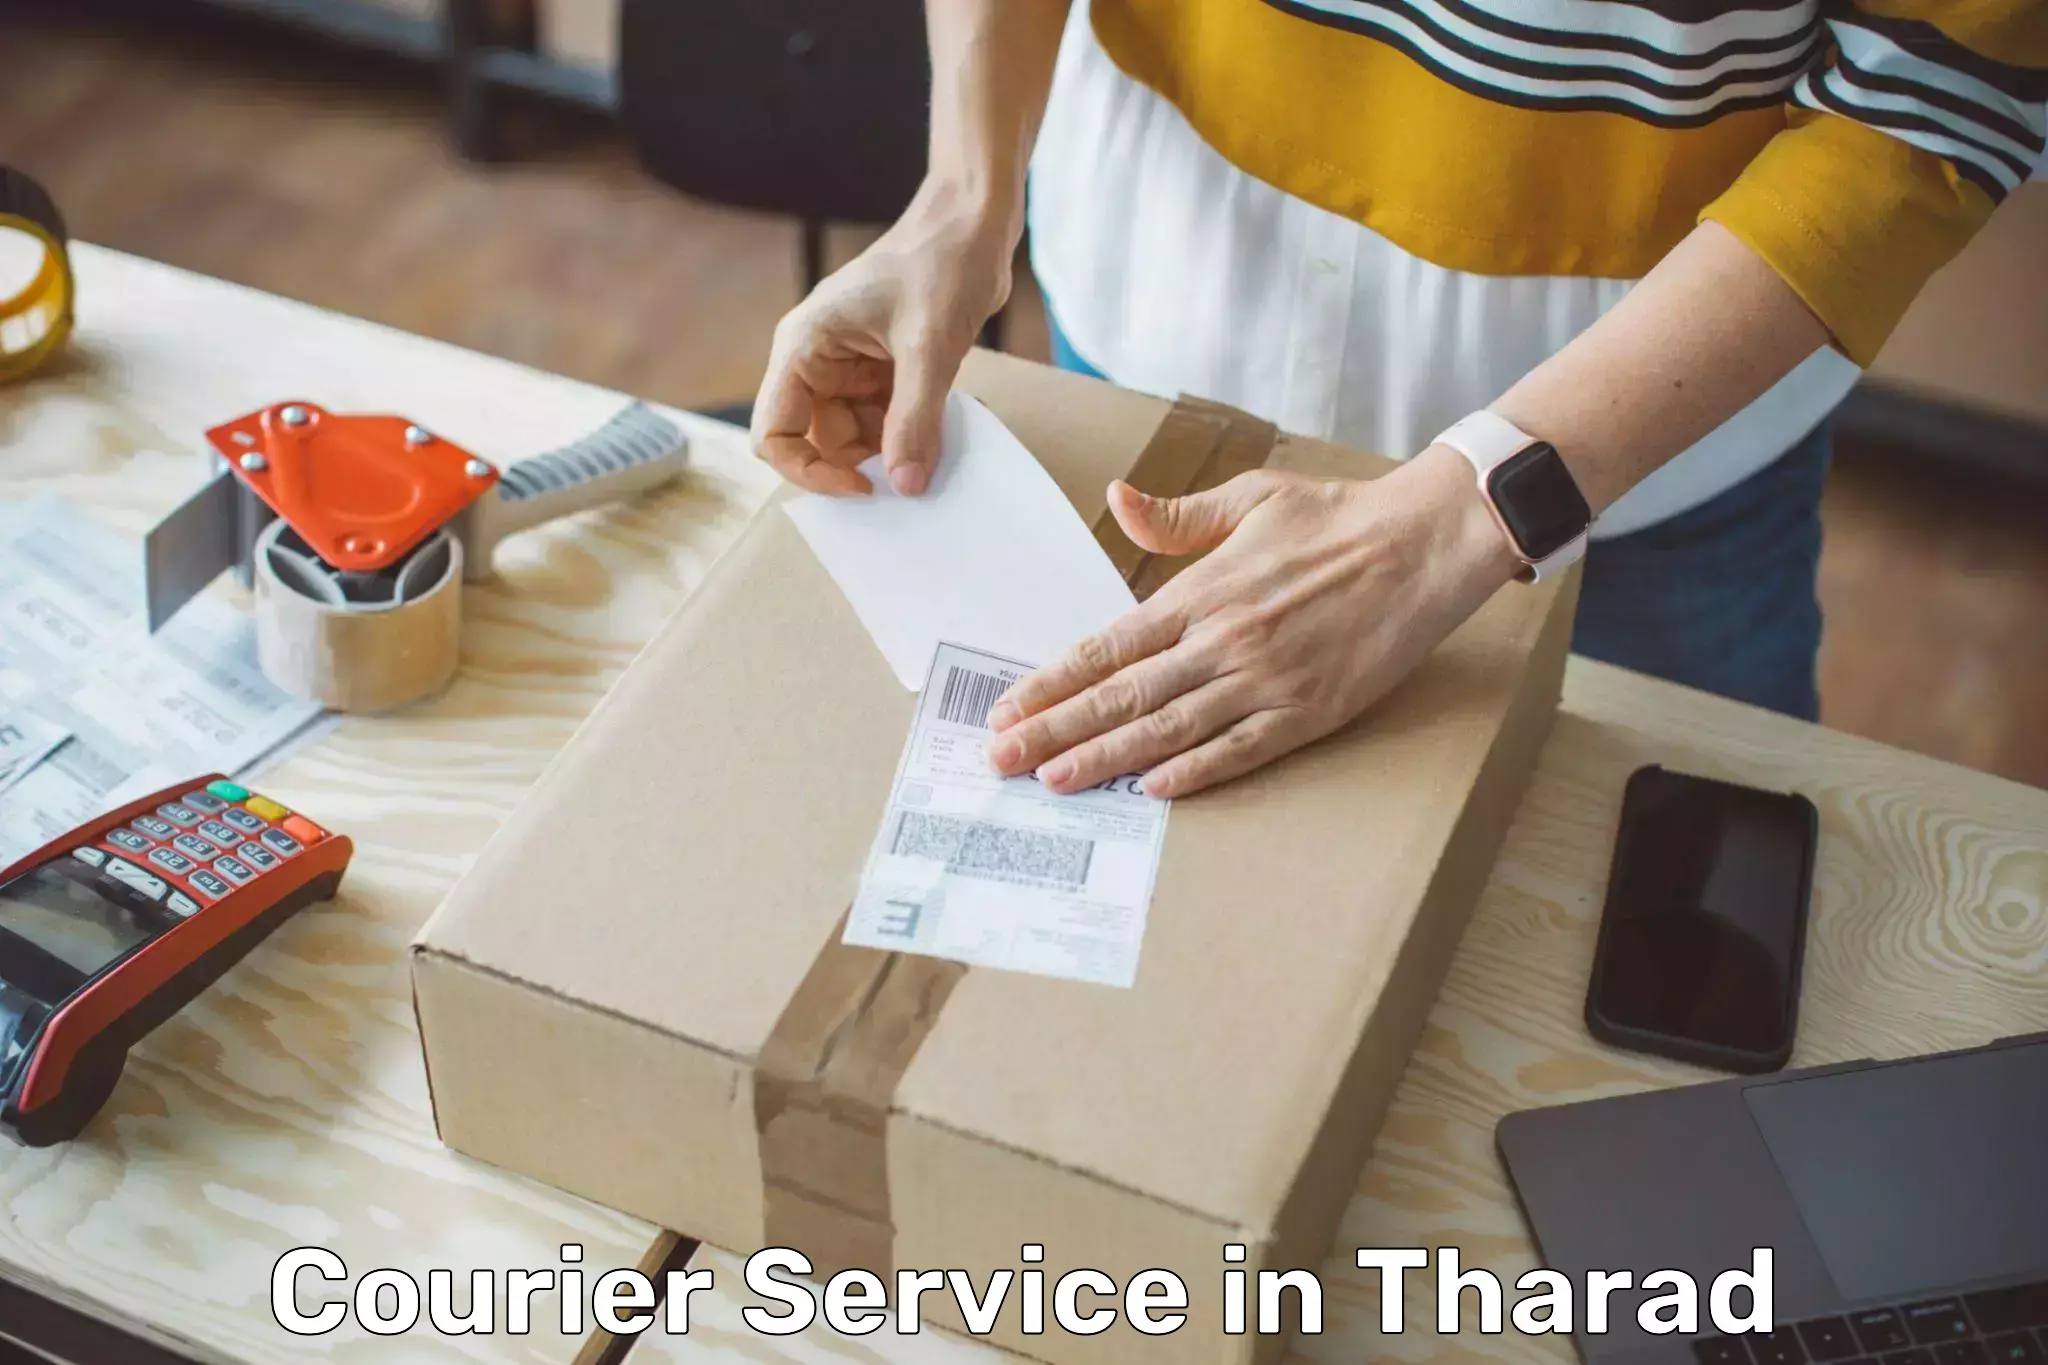 Corporate courier solutions in Tharad